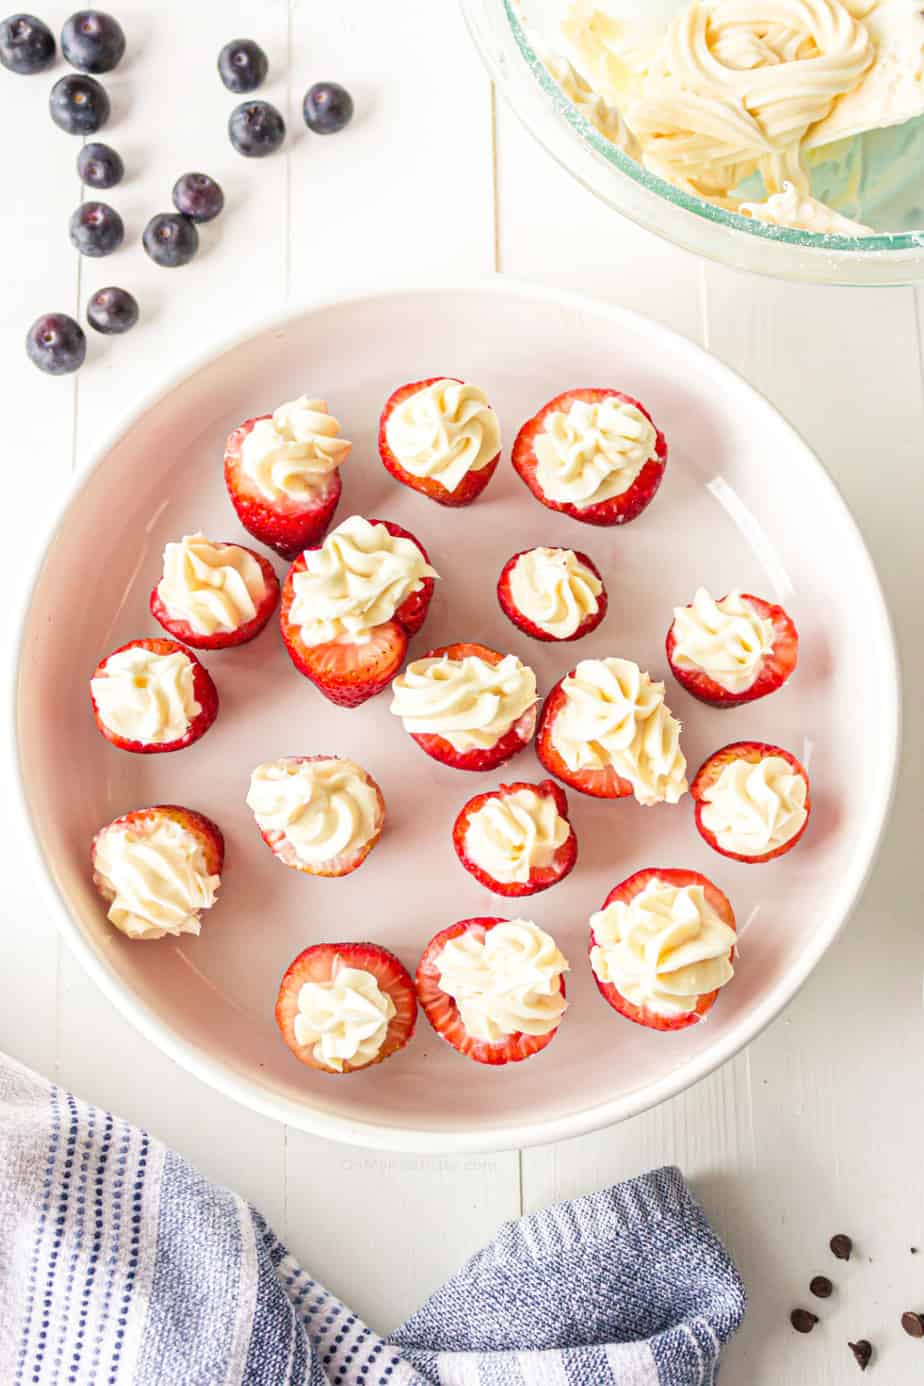 Place full of strawberries facing upwards filled with cream cheese